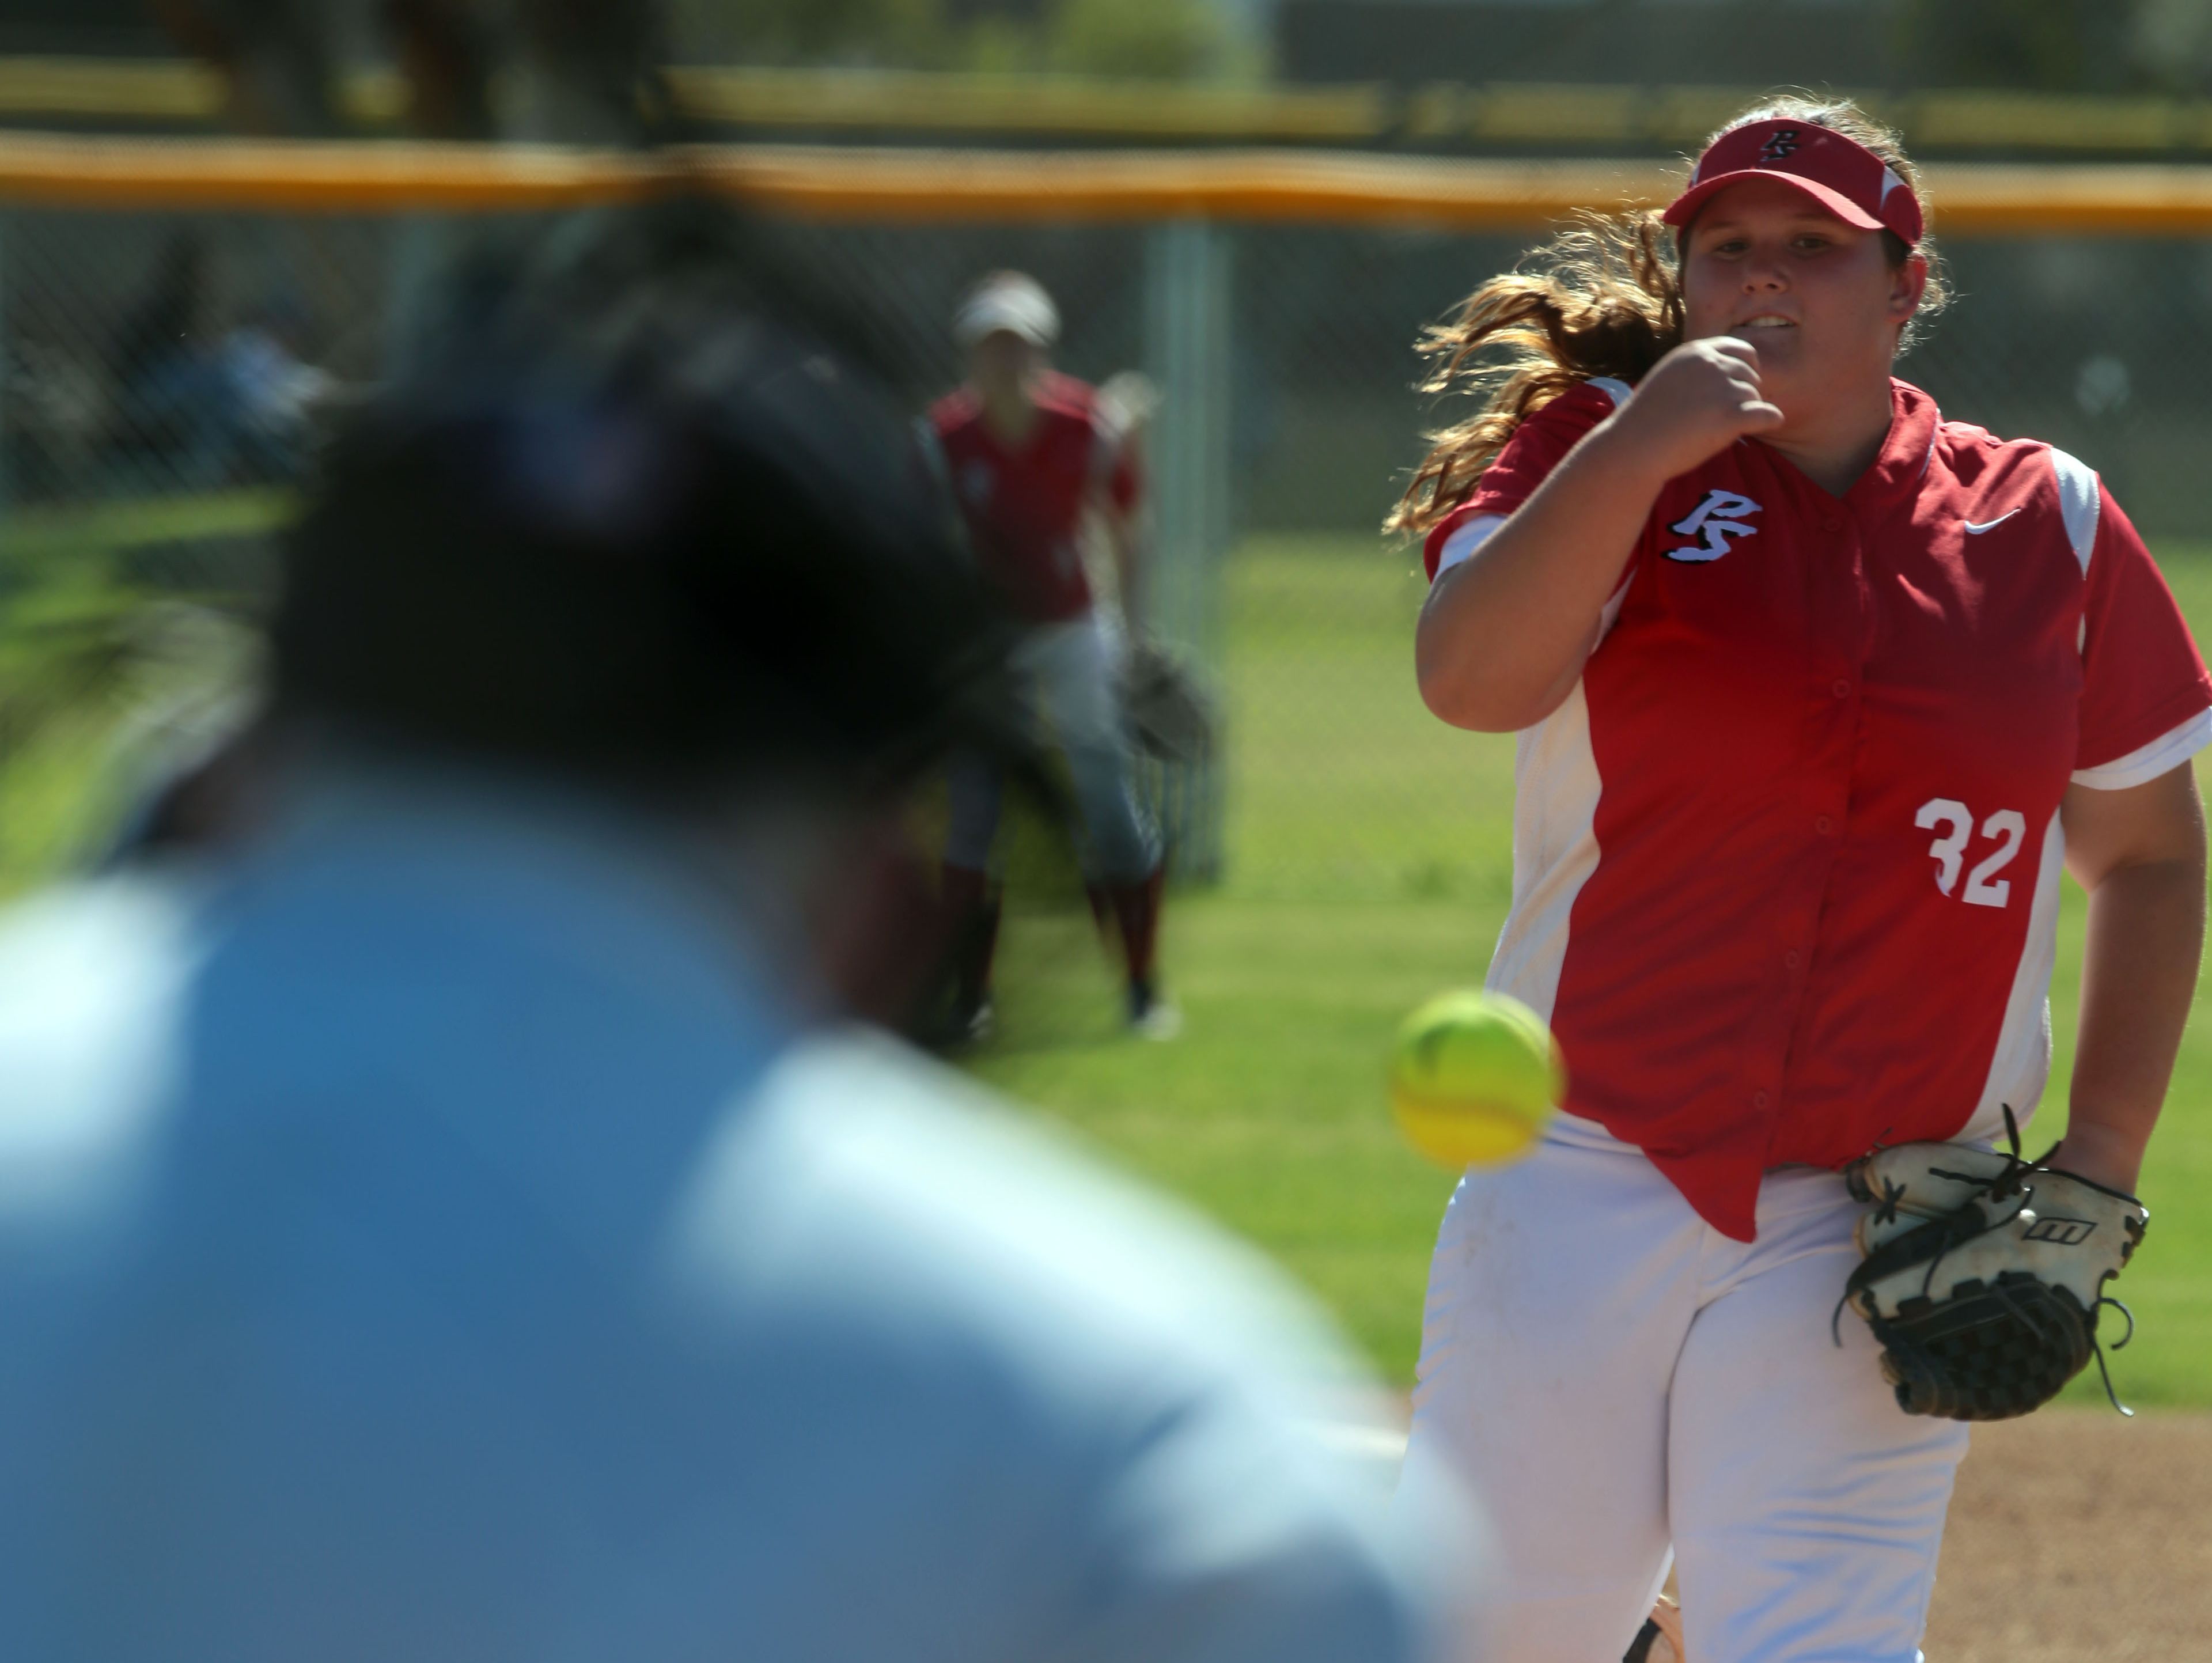 Palm Springs' Sarah Martin pitches against Xavier College Prep on Friday, March 24, 2017 in Palm Springs.